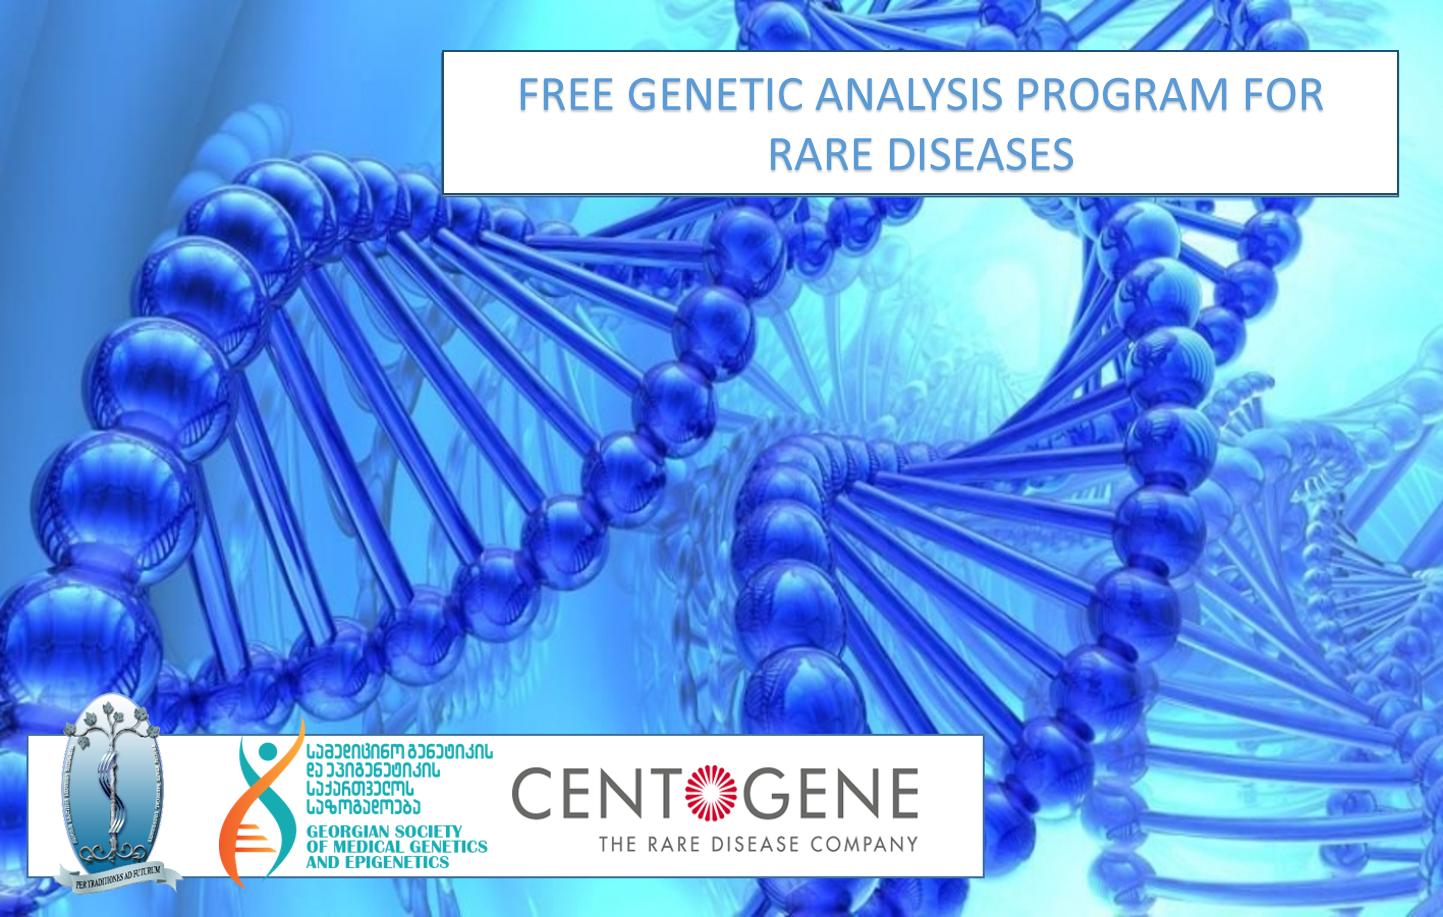 G. Zhvania Pediatric Academic Clinic under TSMU announces free genetic analysis program for rare diseases (biomarkers clinical trial)